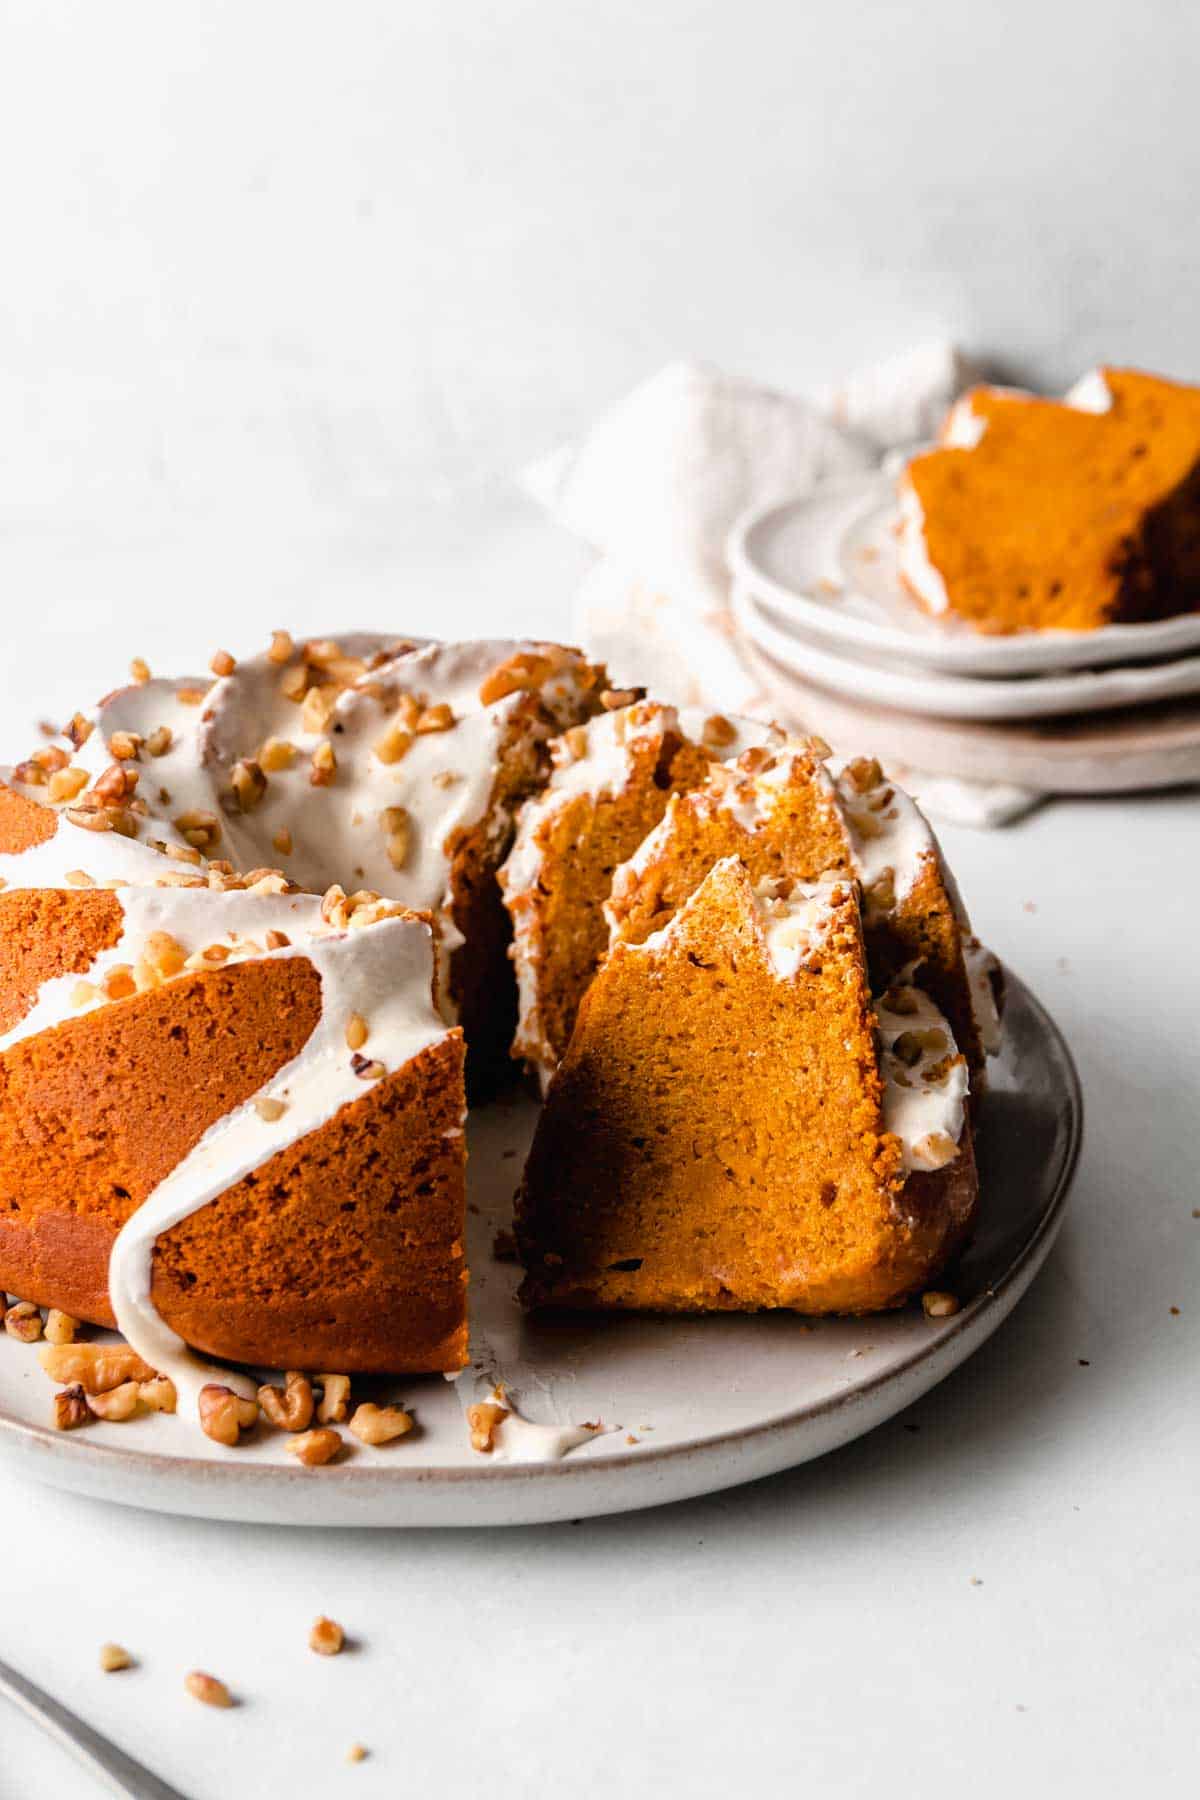 Partially sliced pumpkin bundt cake is orange with white icing, slices rest against the rest of the unsliced cake.